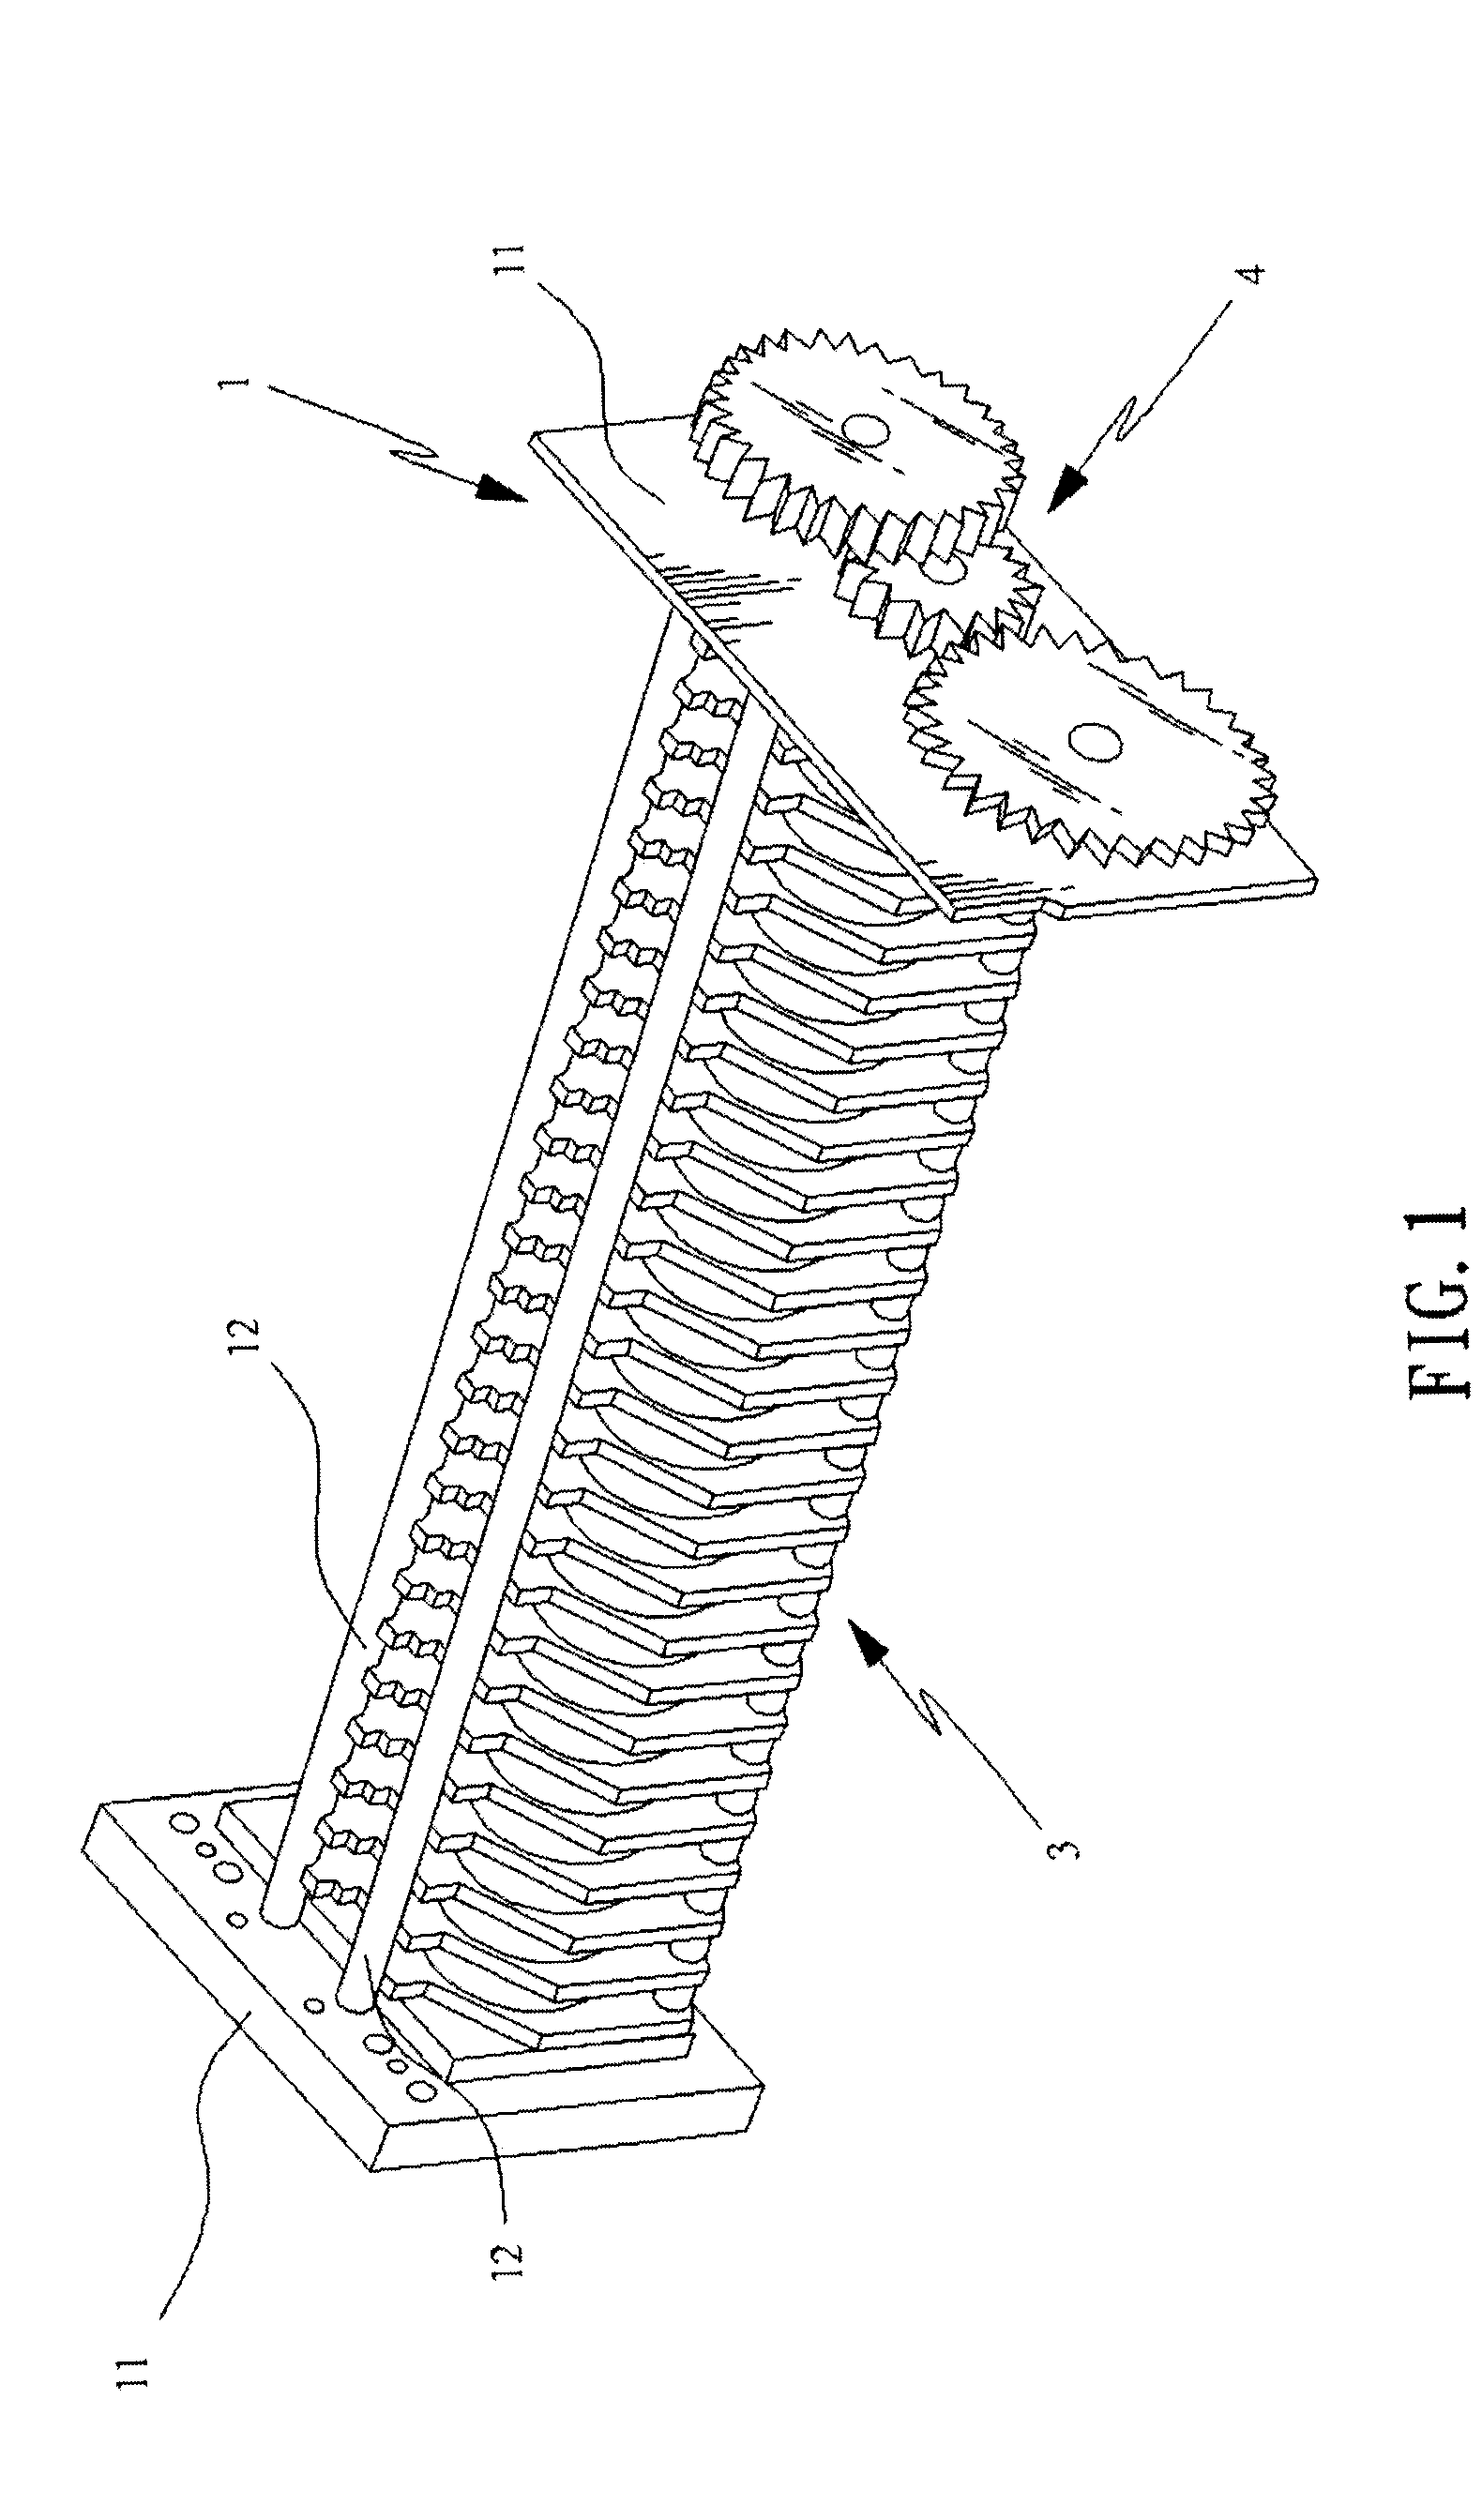 Structure Of The Knife Set Of The Shredder